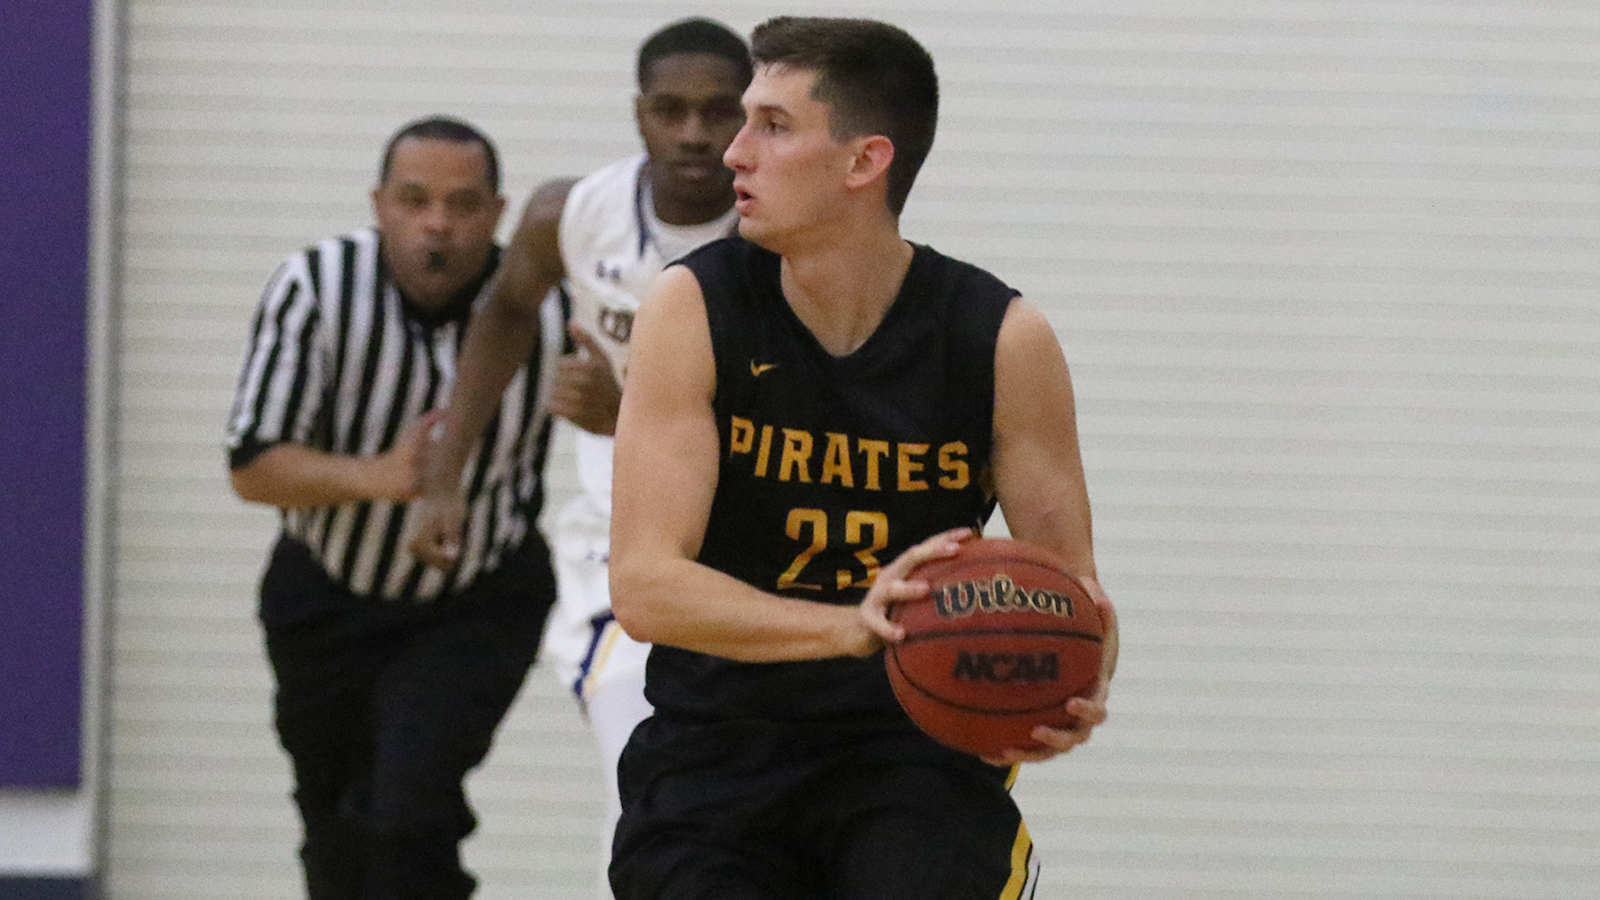 Pirates Hold Off Comets Behind Huge First Half